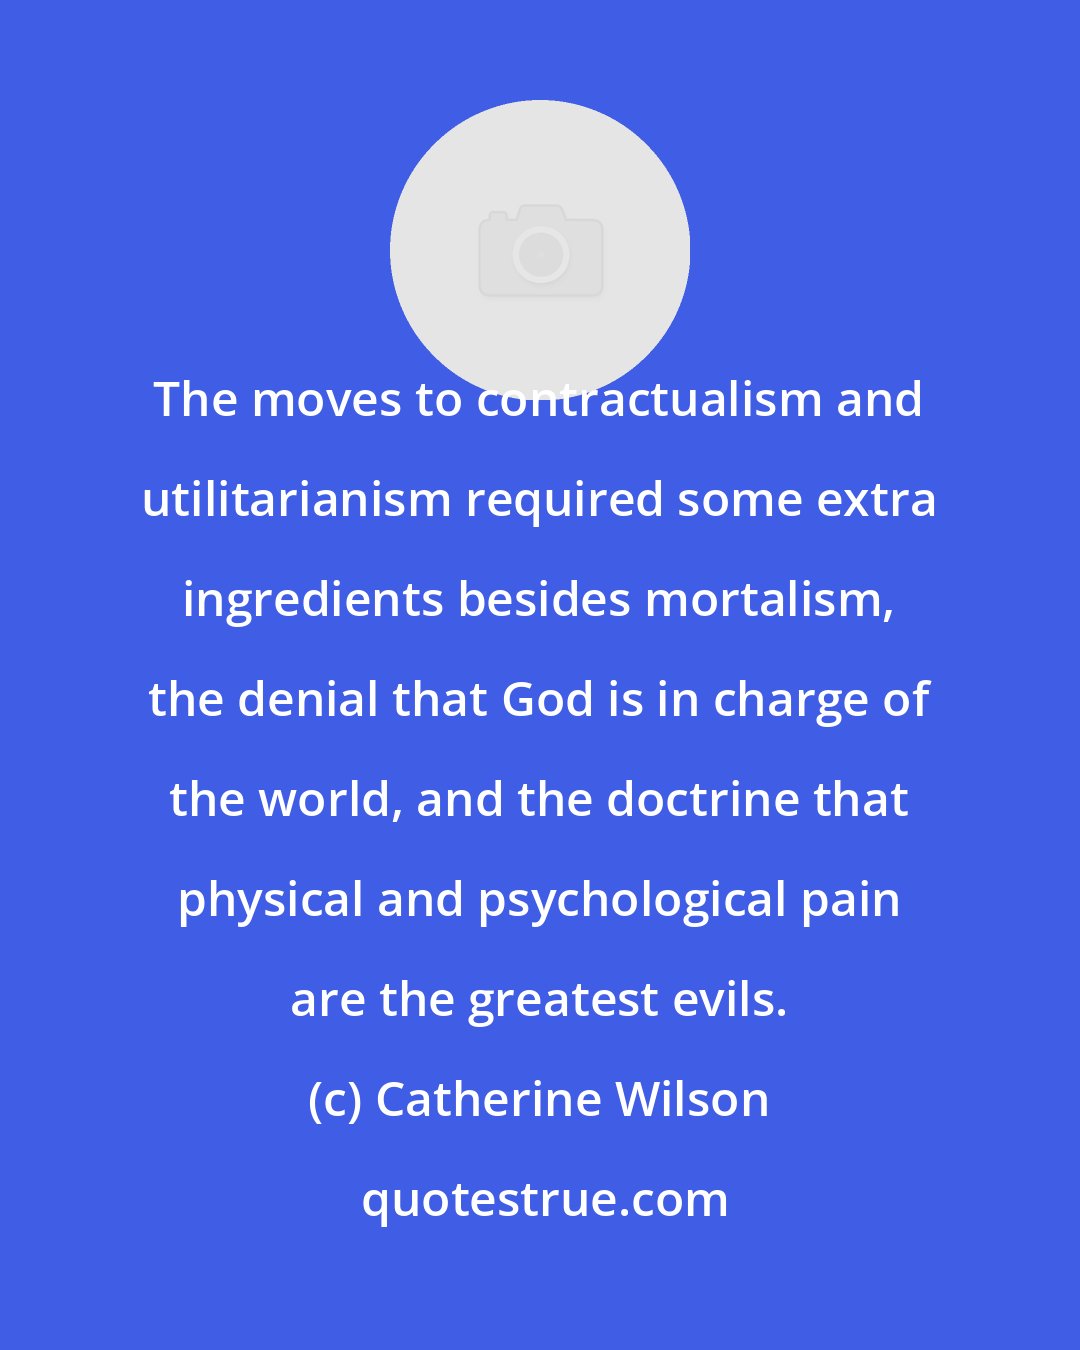 Catherine Wilson: The moves to contractualism and utilitarianism required some extra ingredients besides mortalism, the denial that God is in charge of the world, and the doctrine that physical and psychological pain are the greatest evils.